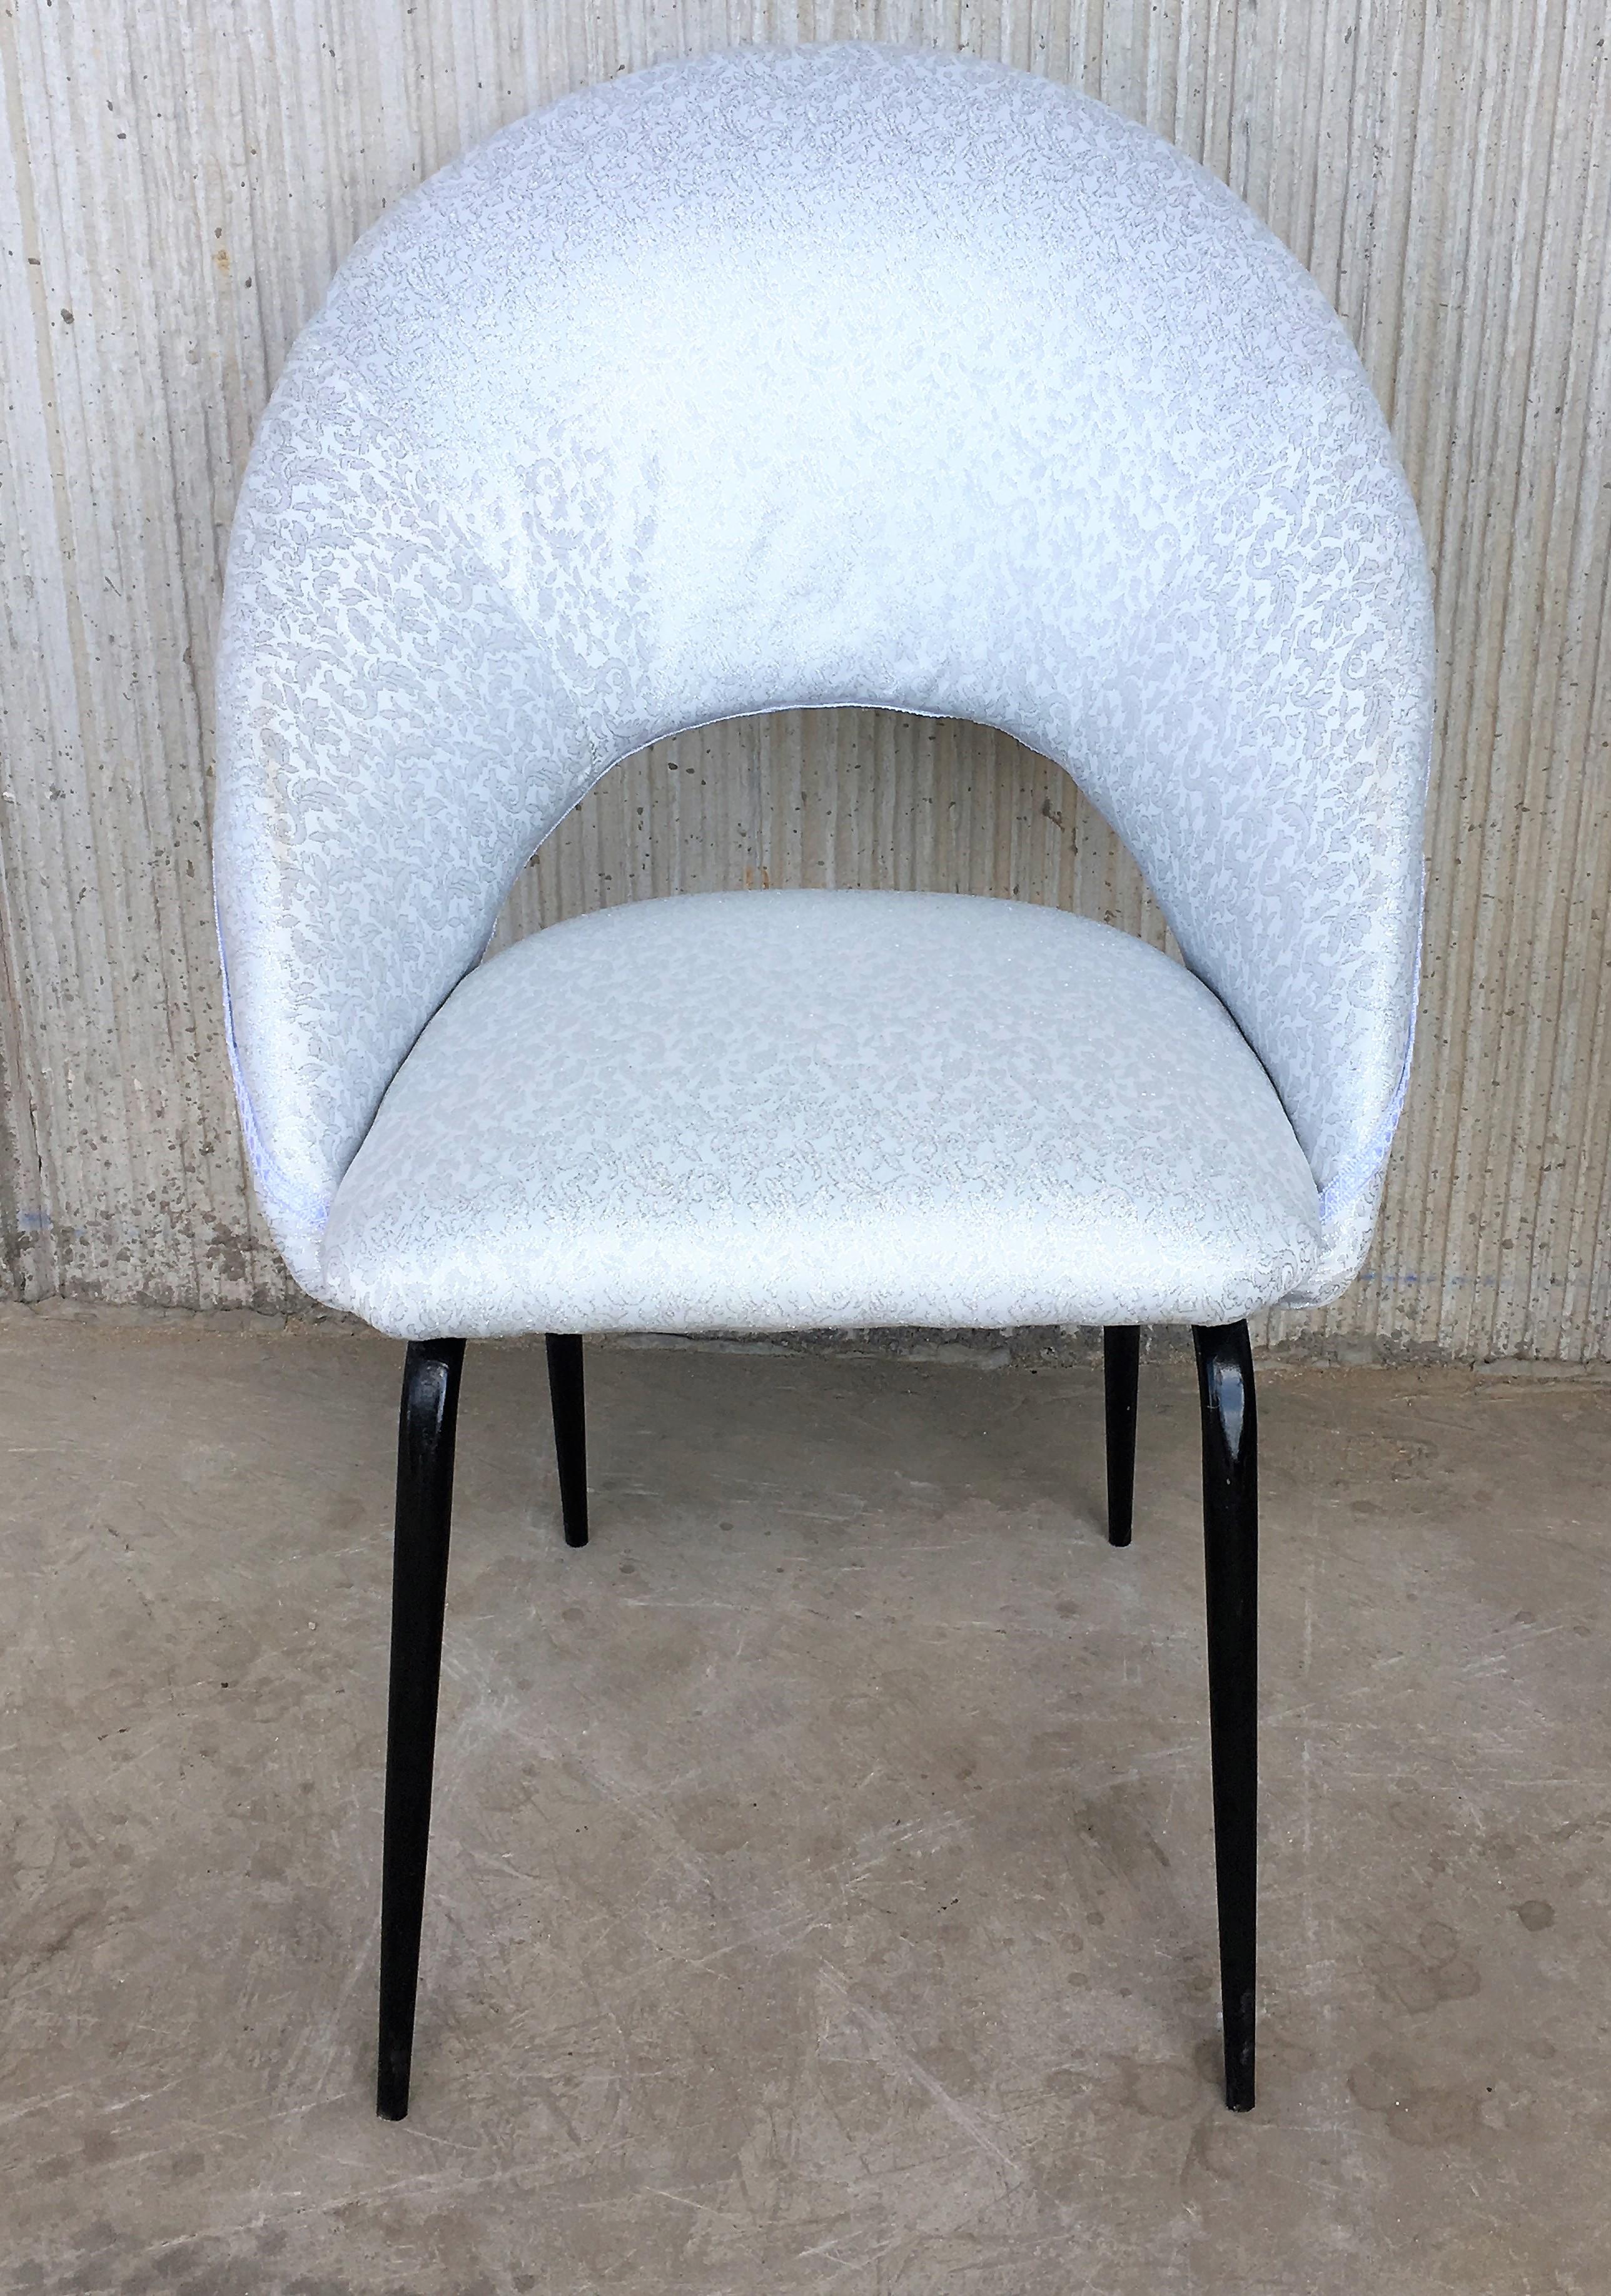 Midcentury Pair of Italian Chairs with Arched Seats and Arched Backrest (20. Jahrhundert)